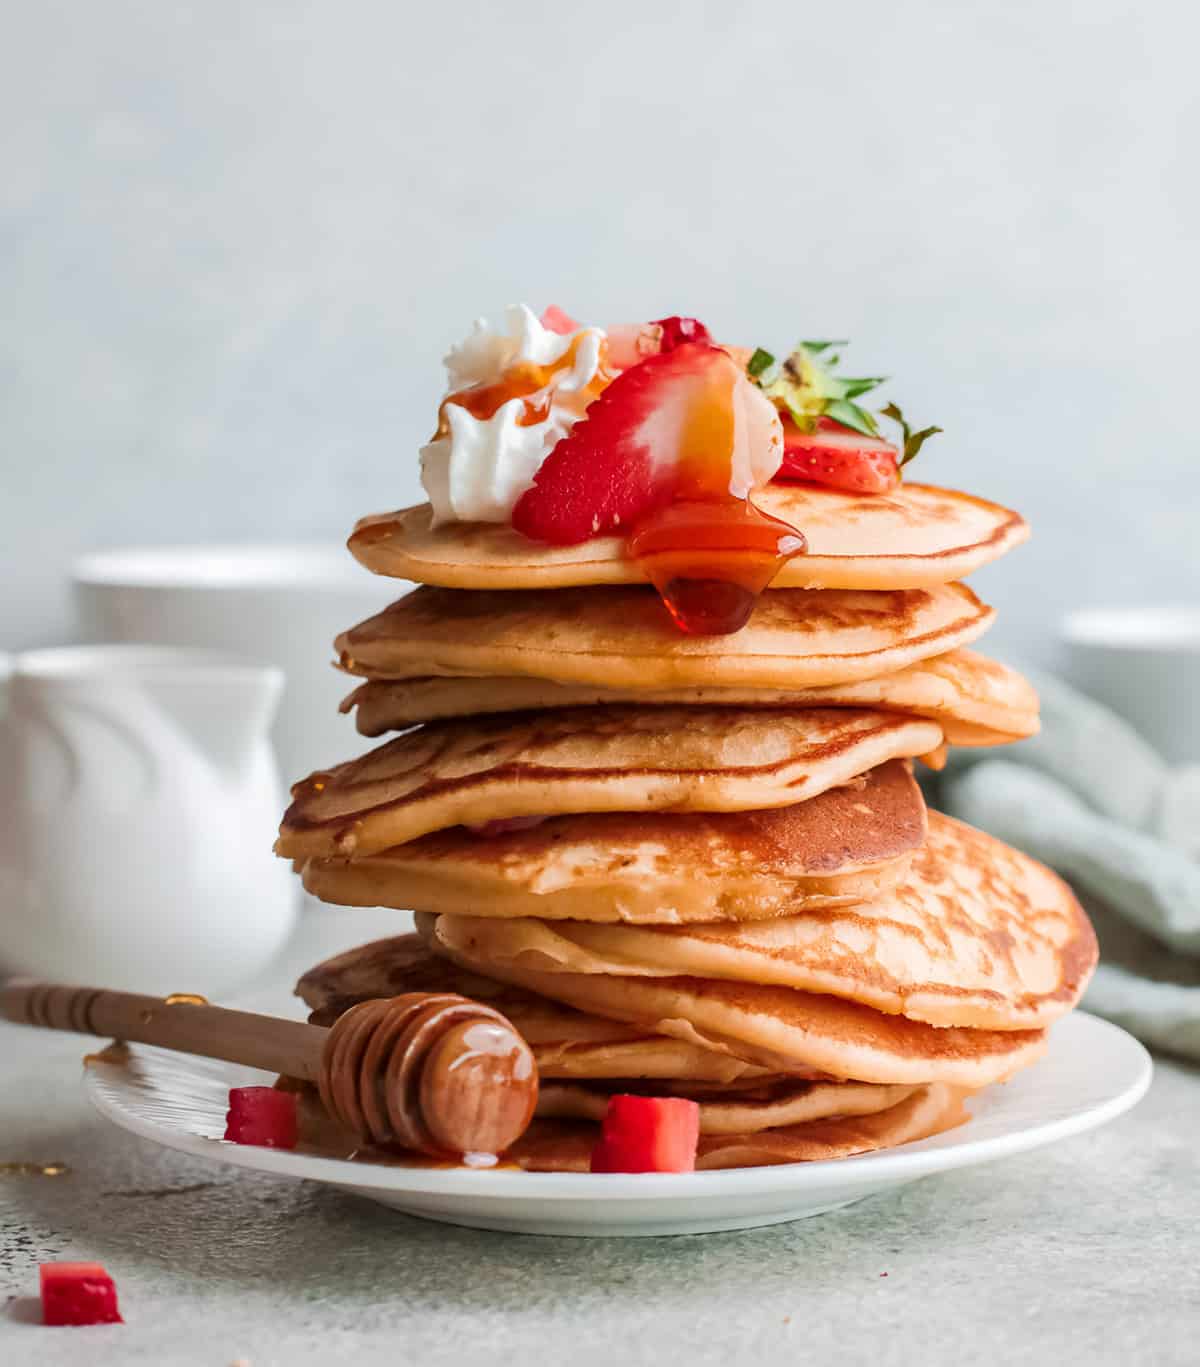 Very tall stack of strawberry ricotta pancakes topped with fresh strawberries.